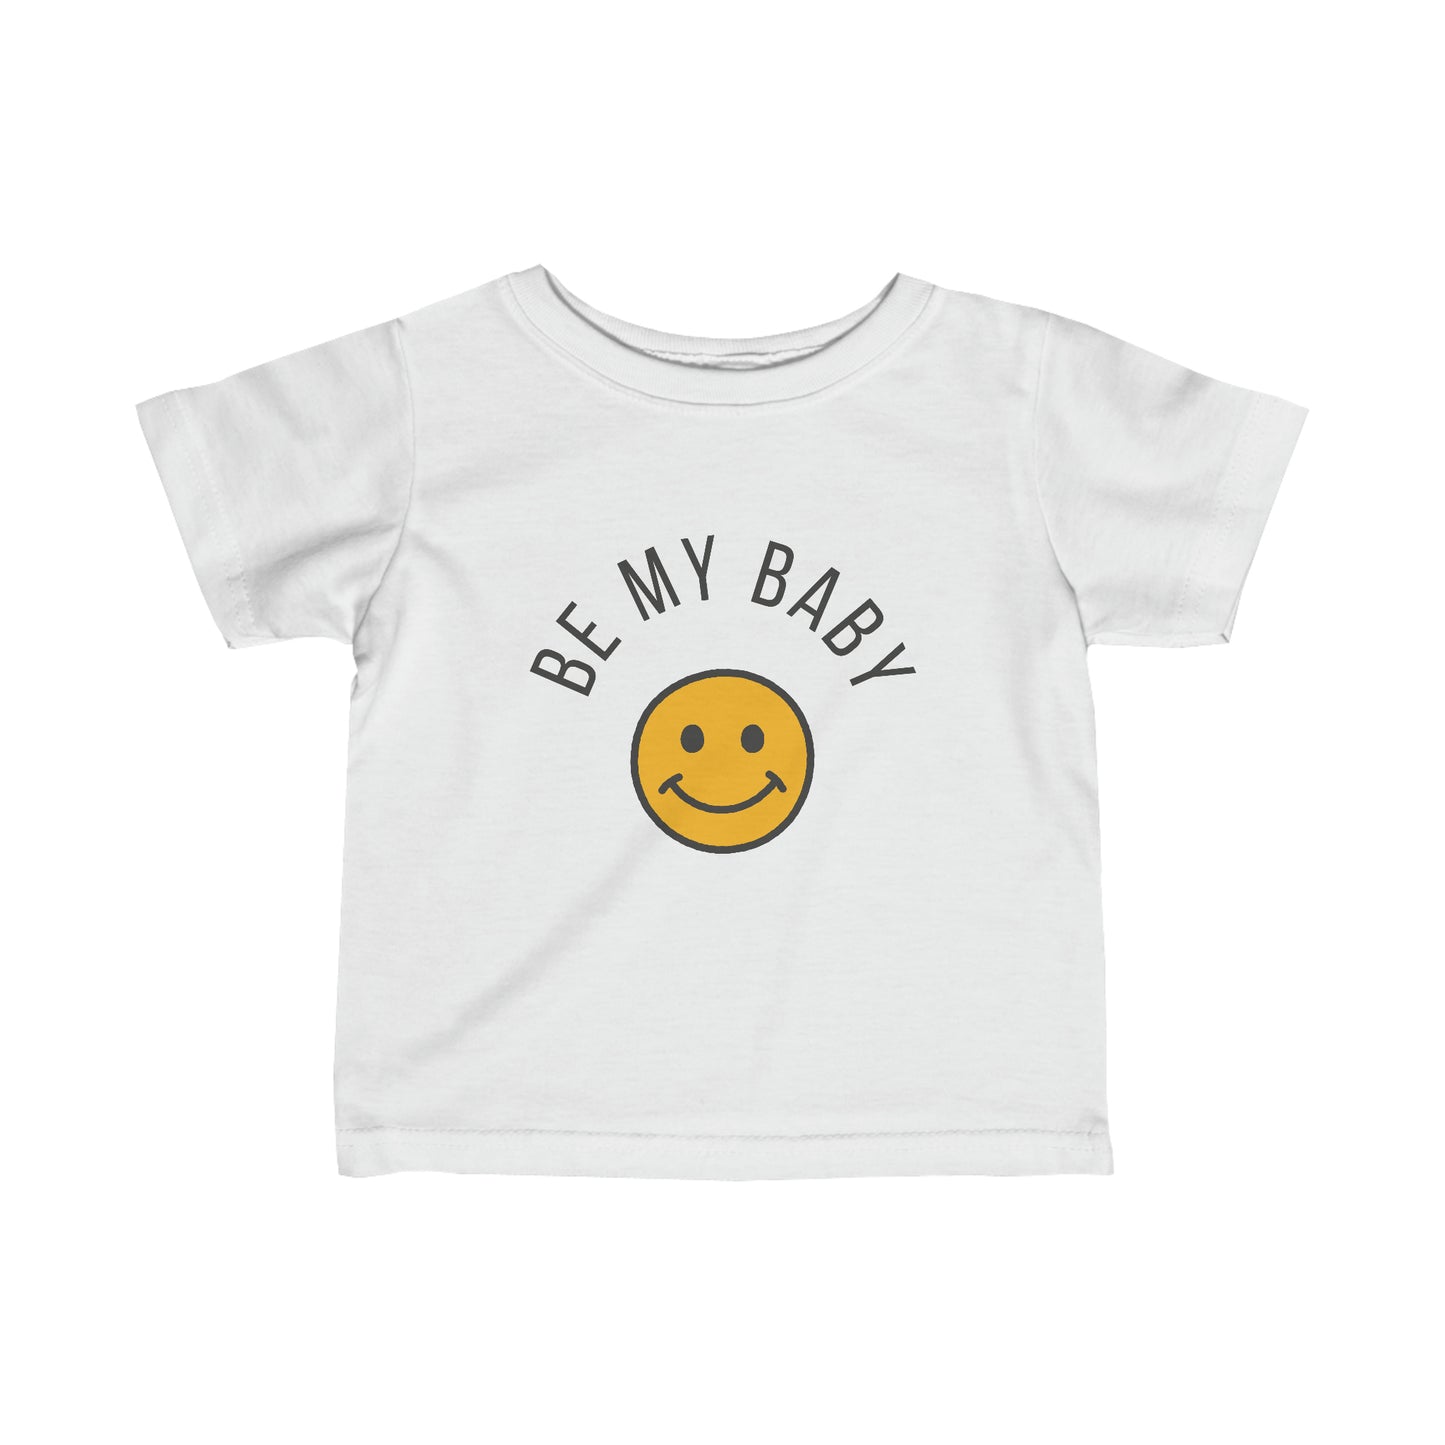 BE MY BABY unisex print short-sleeved t-shirt for 6m-24m